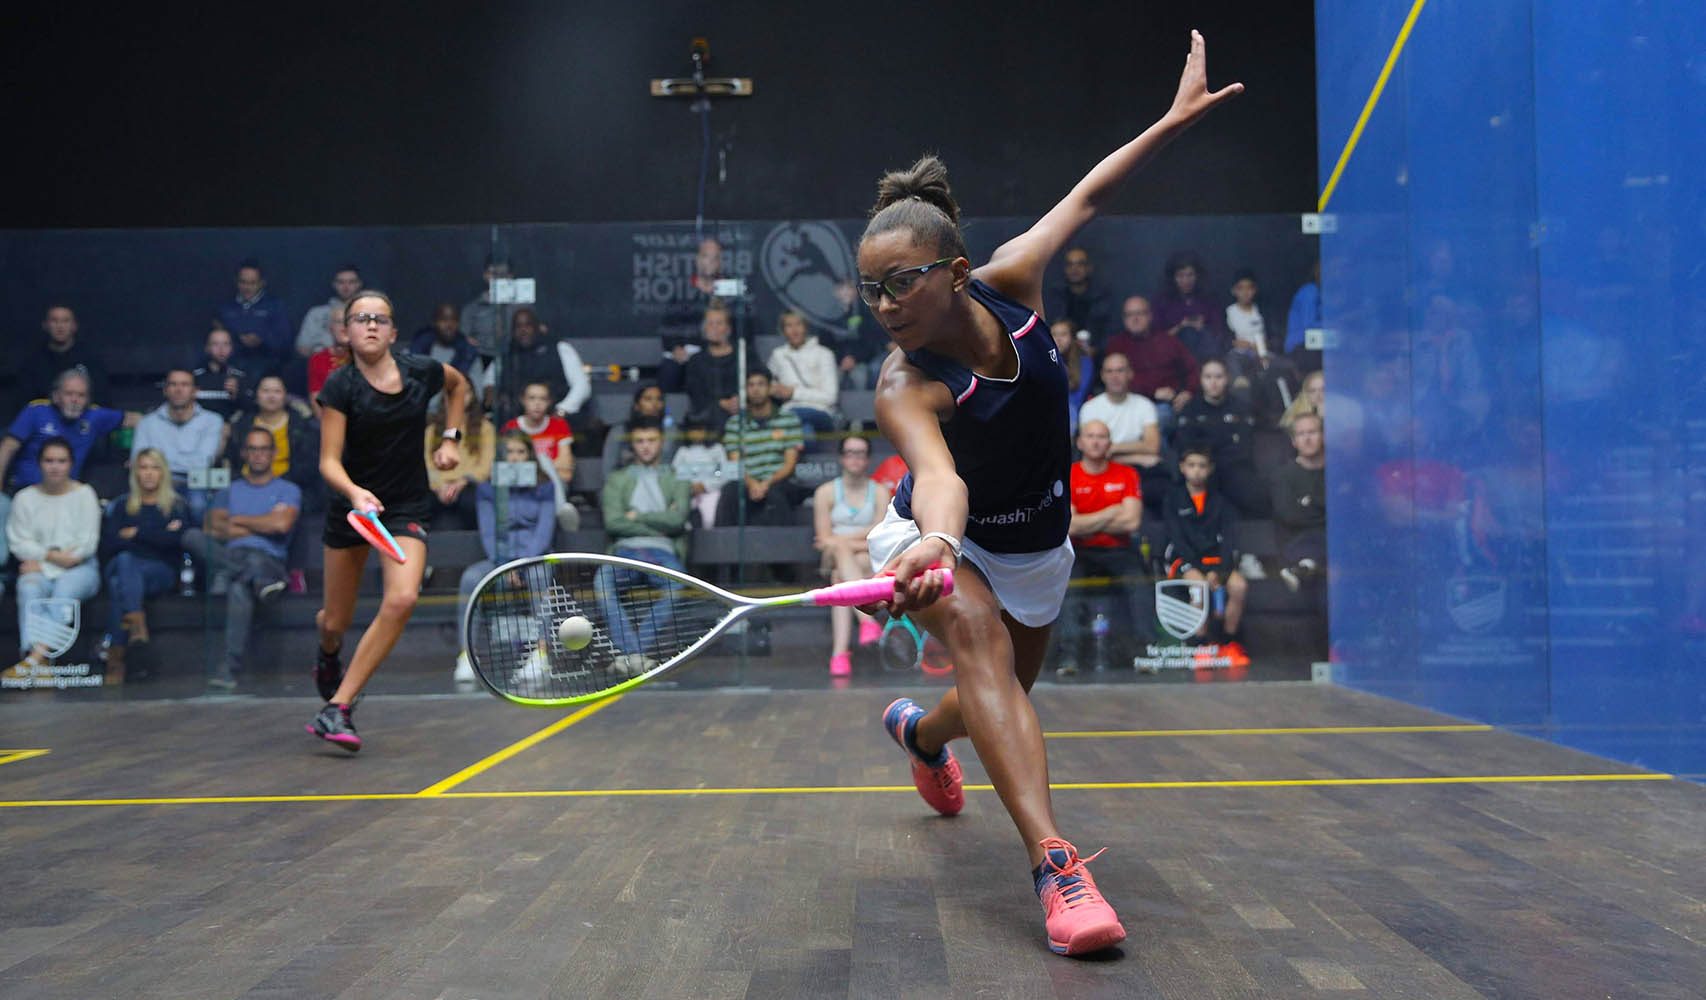 Amelie Haworth and Asia Harris playing at the Dunlop British Junior Championships 2019